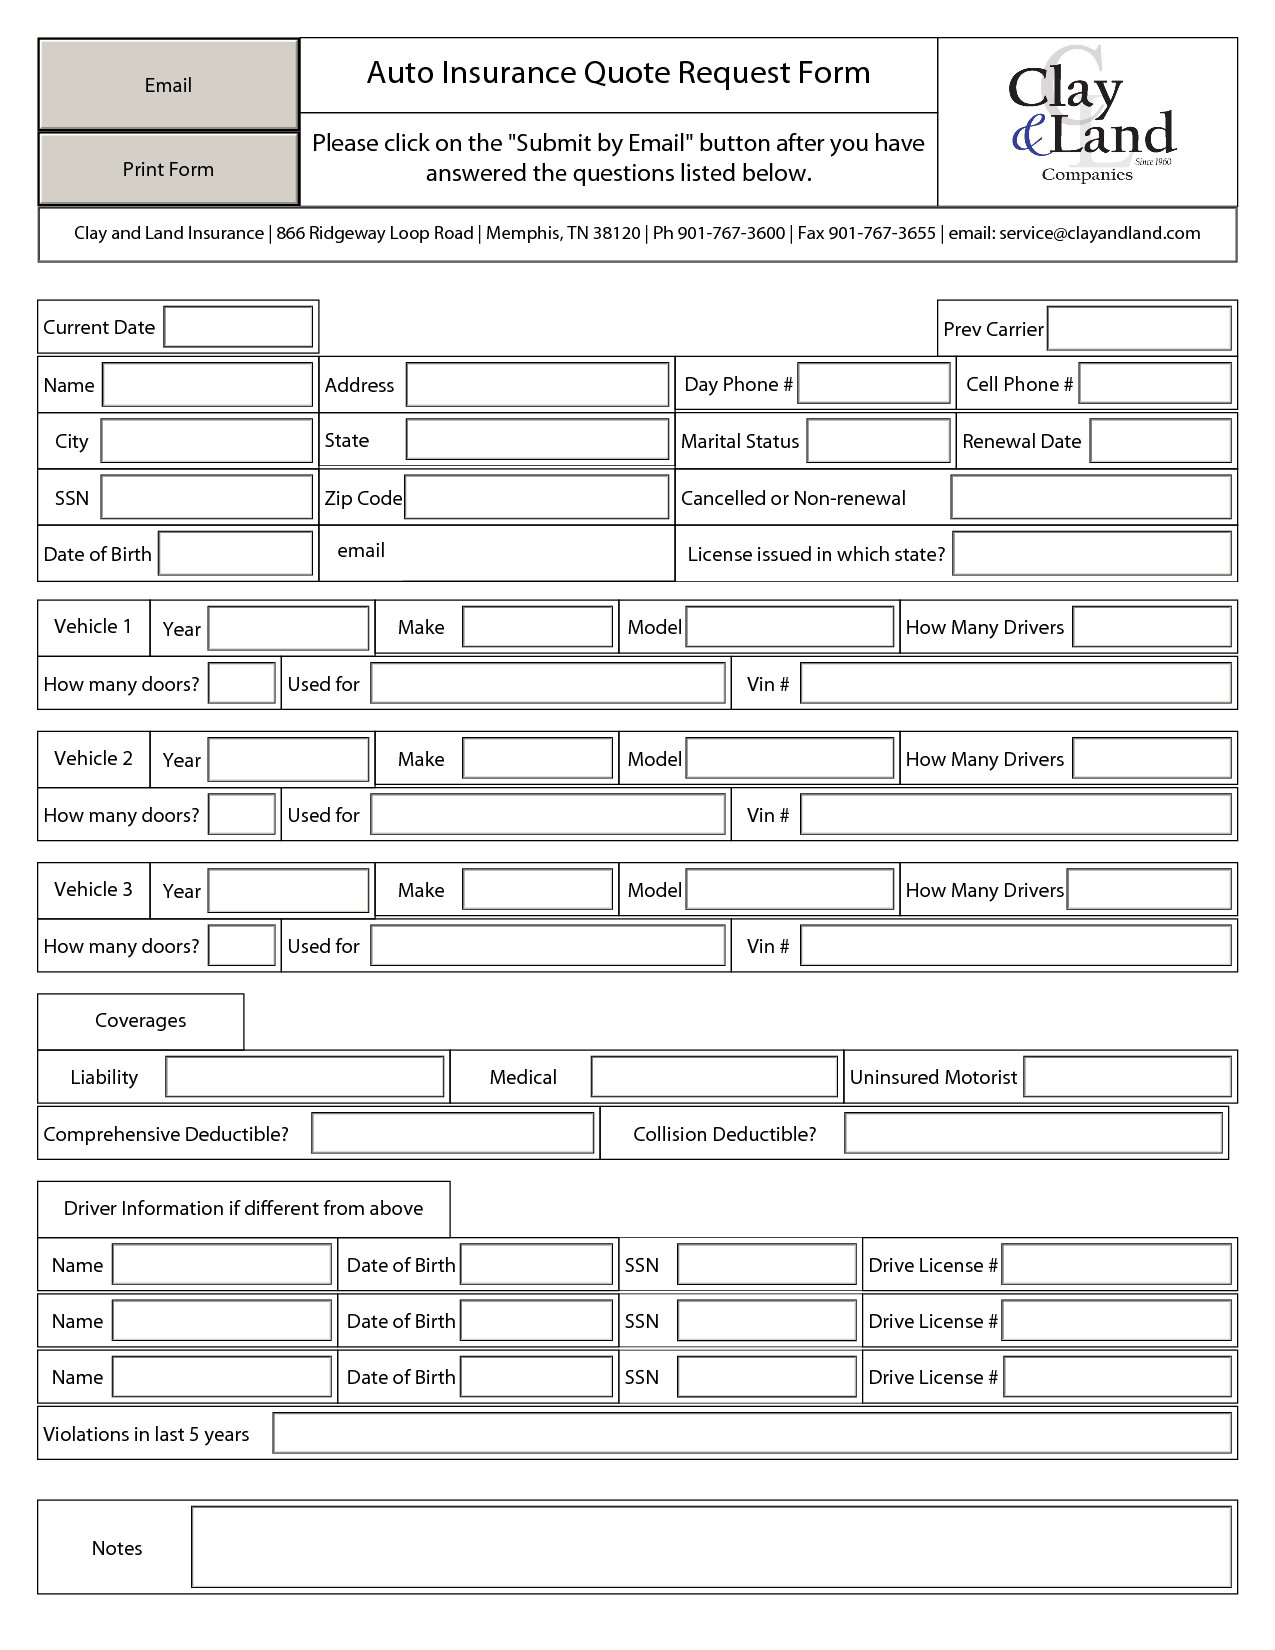 Retirement Spreadsheet Template intended for Retirement Calculator Spreadsheet  Tagua Spreadsheet Sample Collection